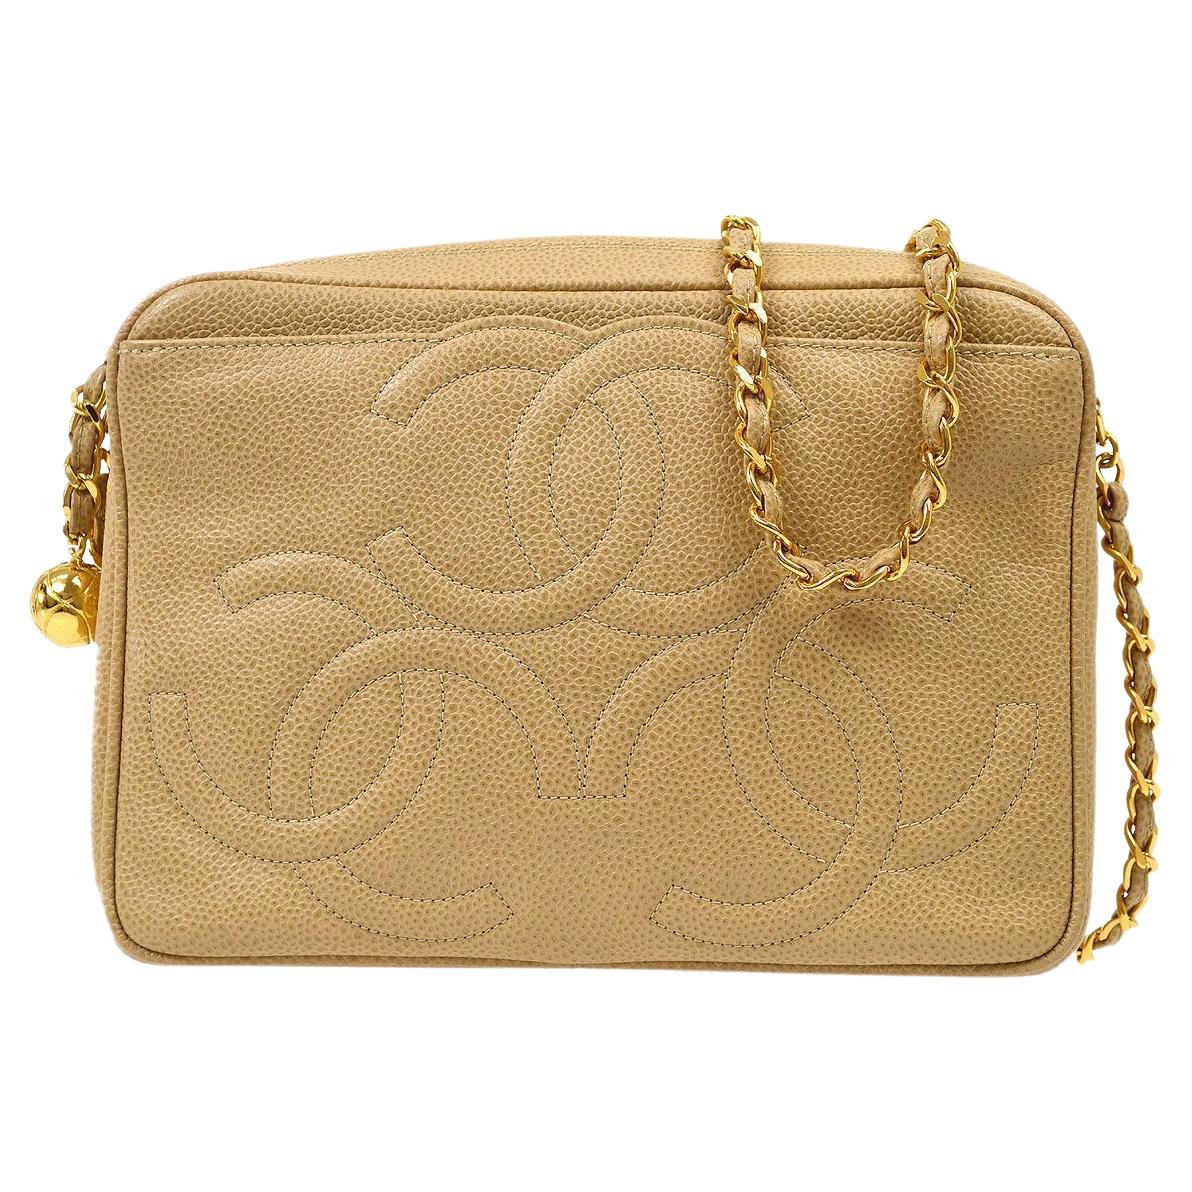 Chanel Classic Flap Quilted Light Brown Leather Cross Body Bag At Stdibs